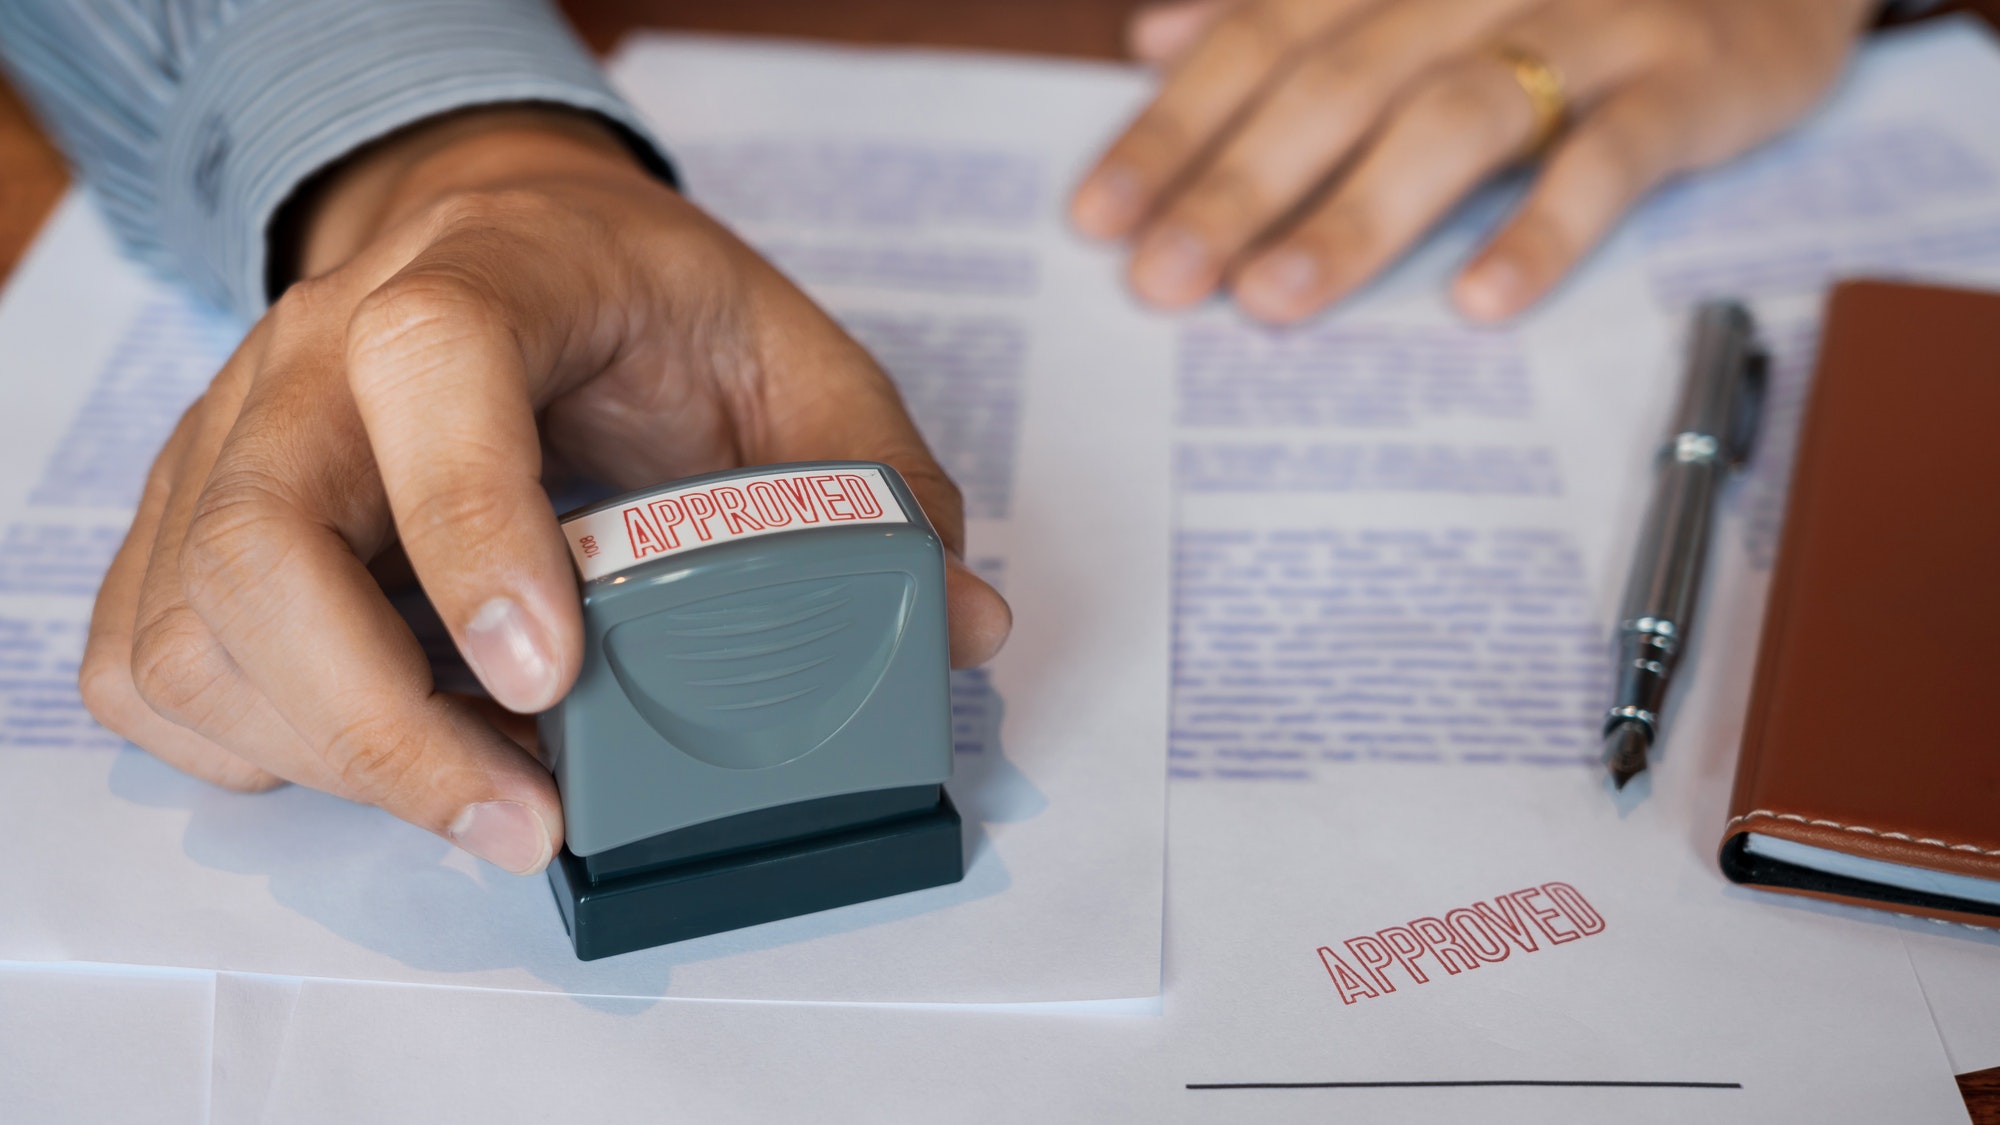 businessman Hand notary public hand ink appoval stamper Stamping seal On Approved Contract Form